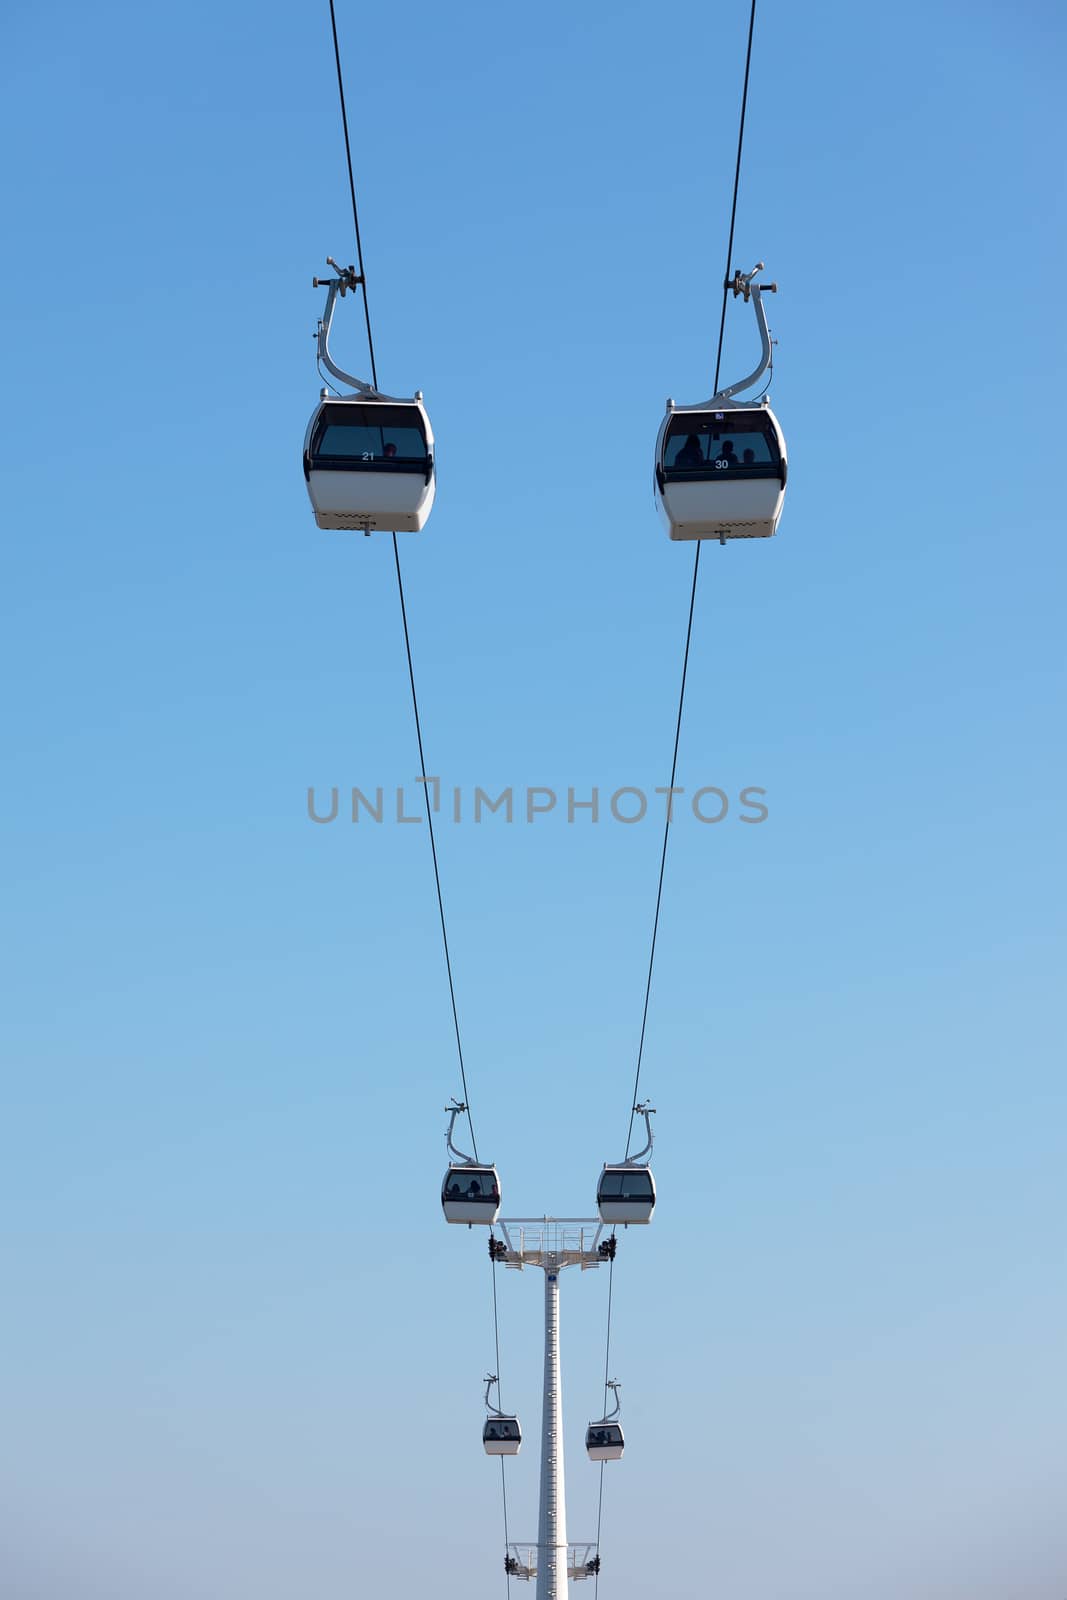 Cable car on blue sky background, in Expo district, Lisbon, Portugal